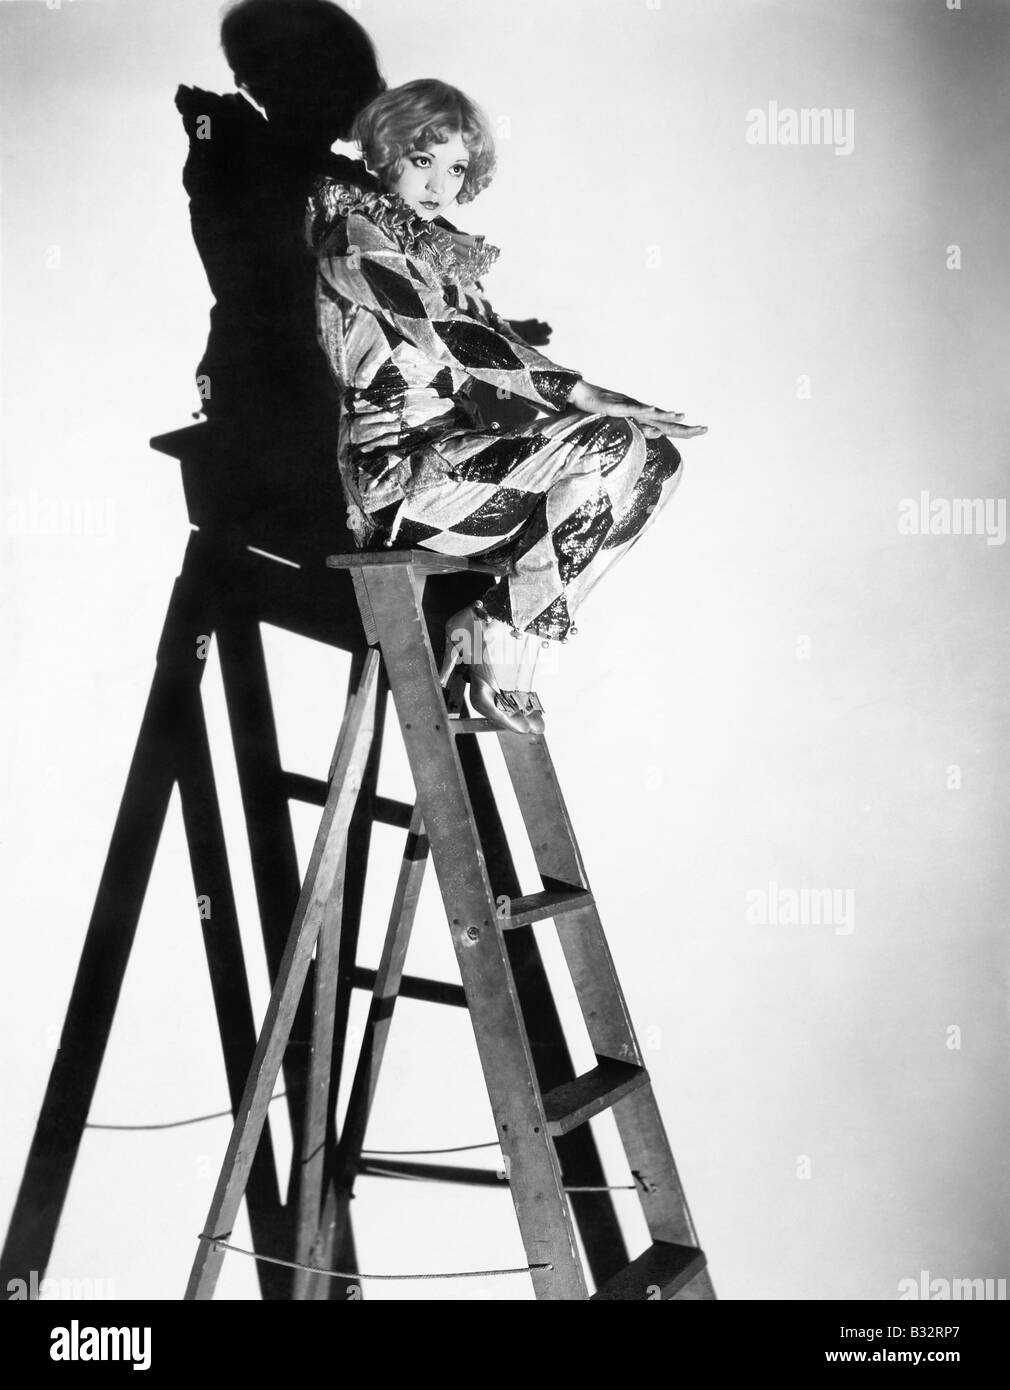 Profile of a young woman sitting on a ladder Stock Photo